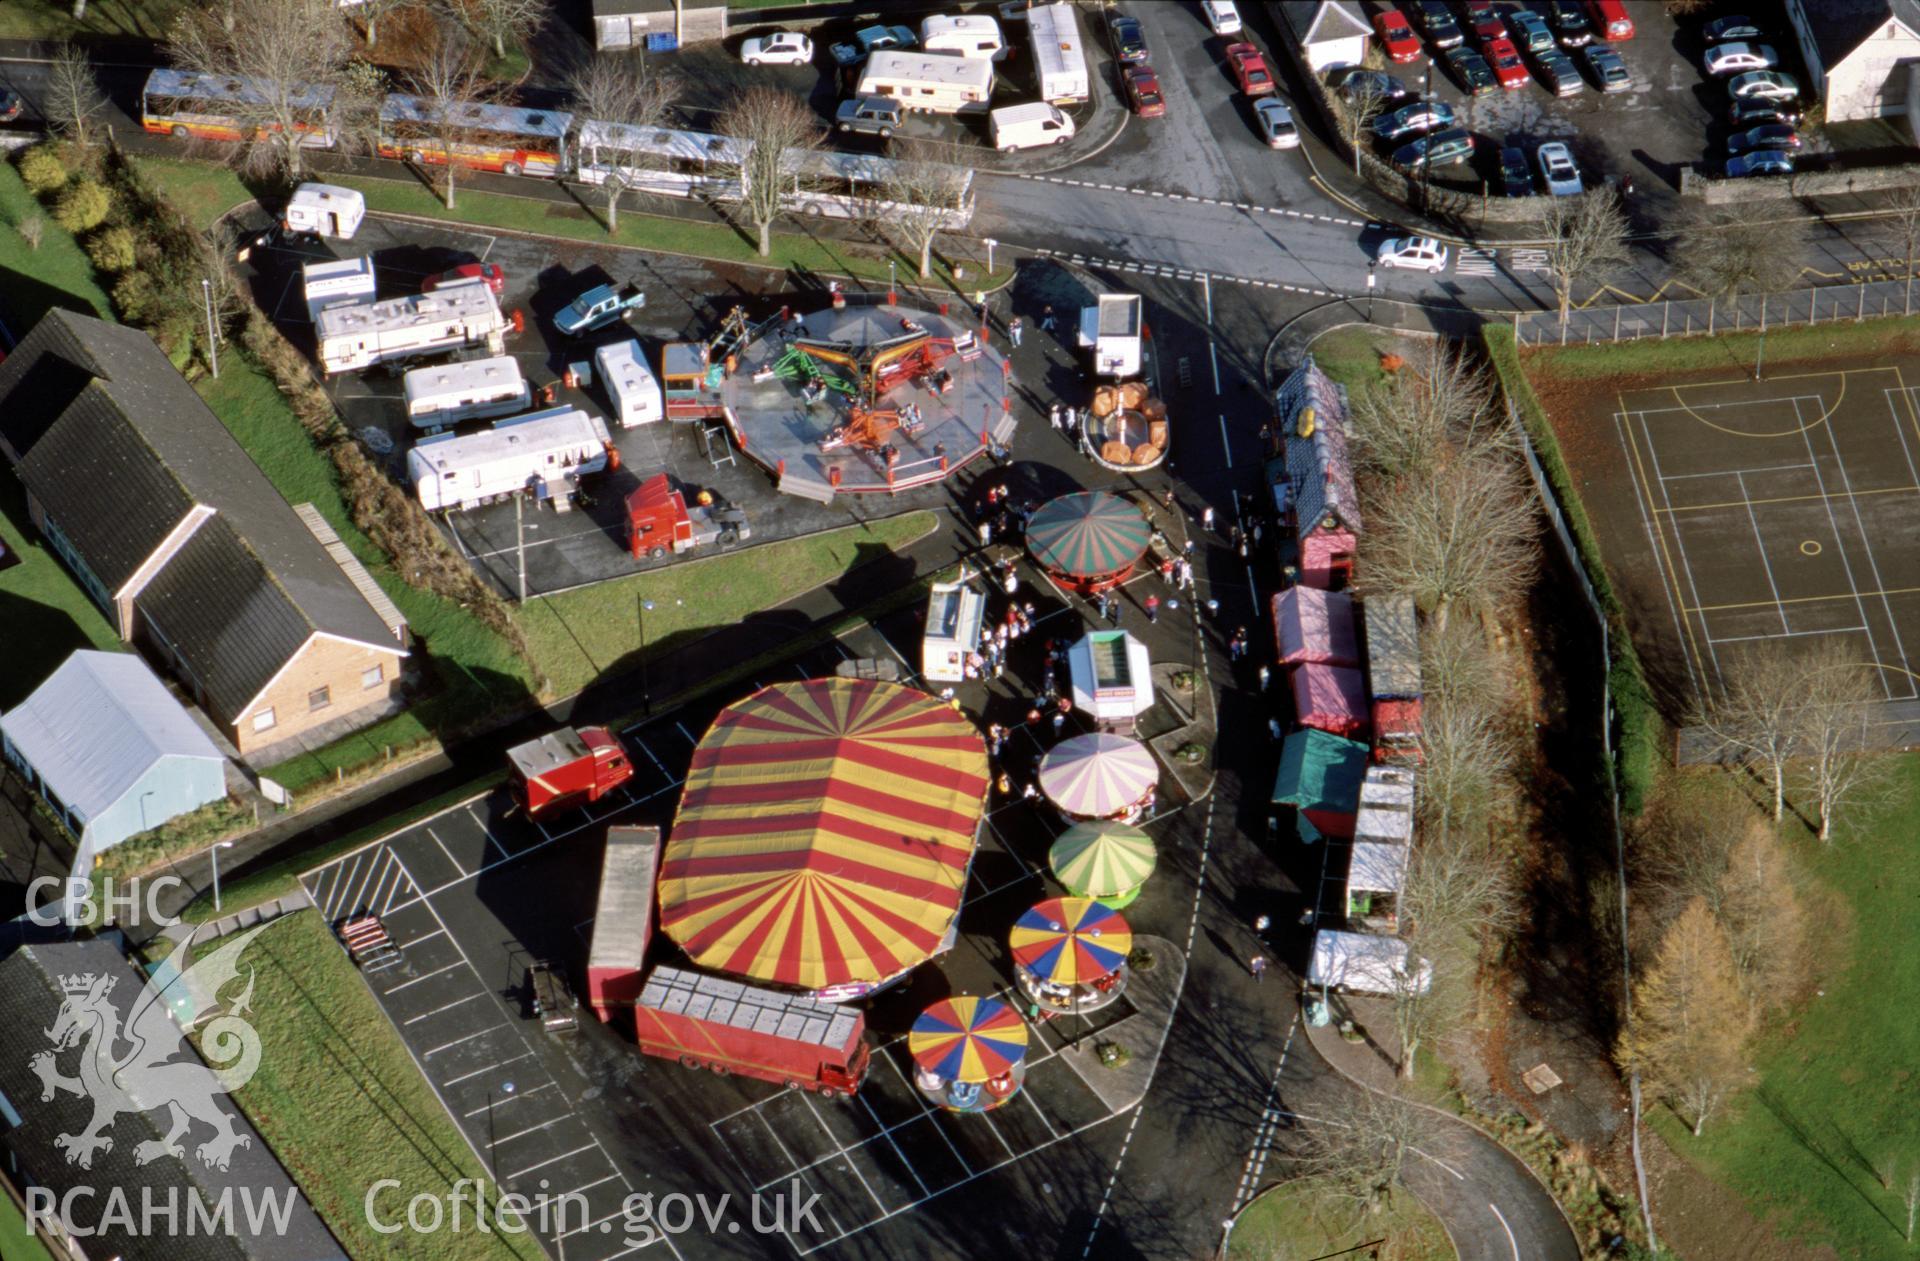 Digital copy of RCAHMW colour slide showing an aerial view of Lampeter Winter Fair.